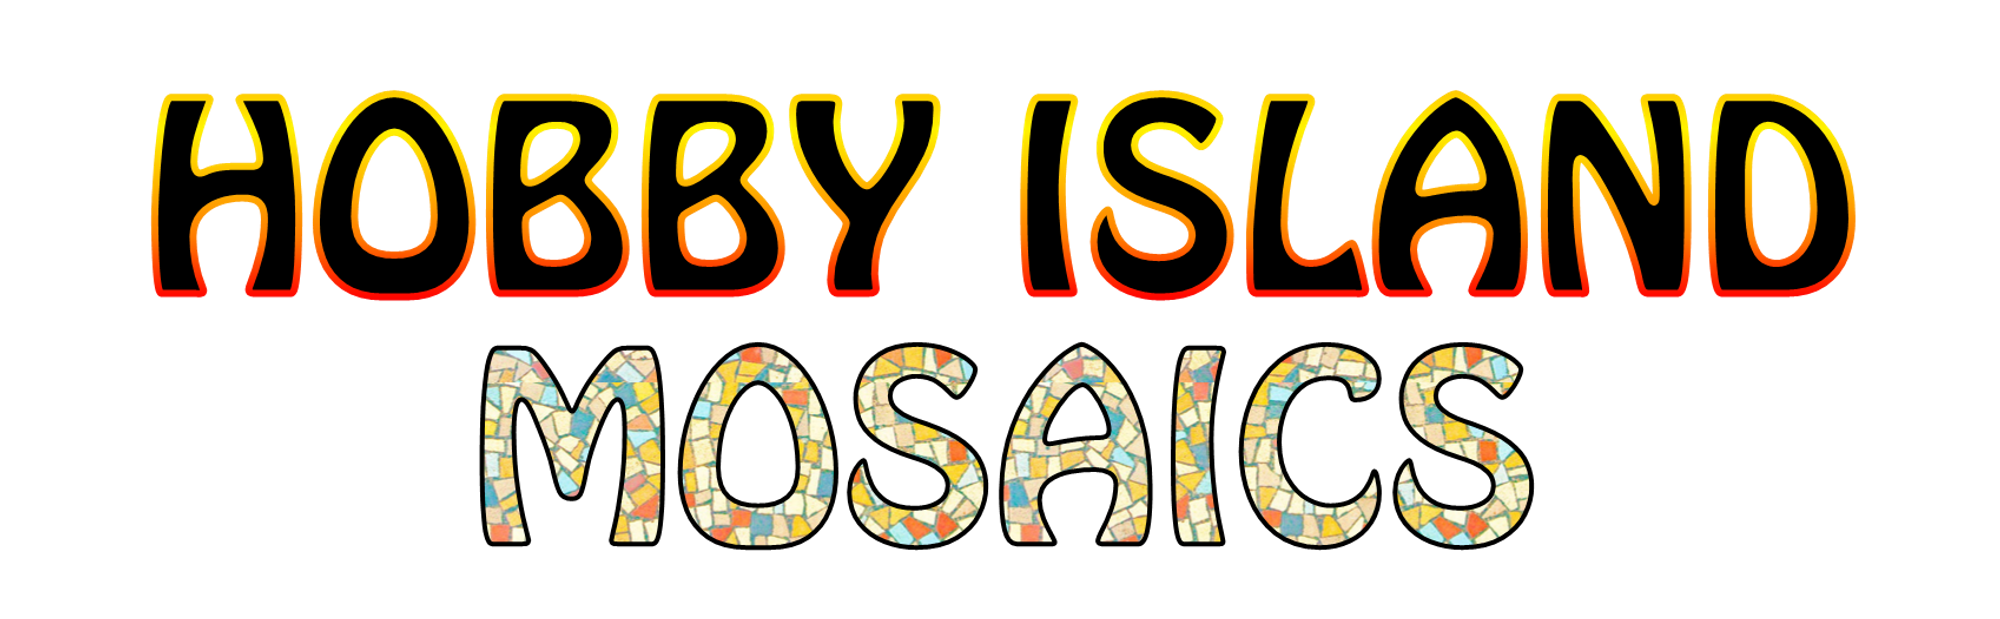 Hobby Island is an online retailer of mosaic tiles and hobby items. Visit hobby-island.co.uk for more information.